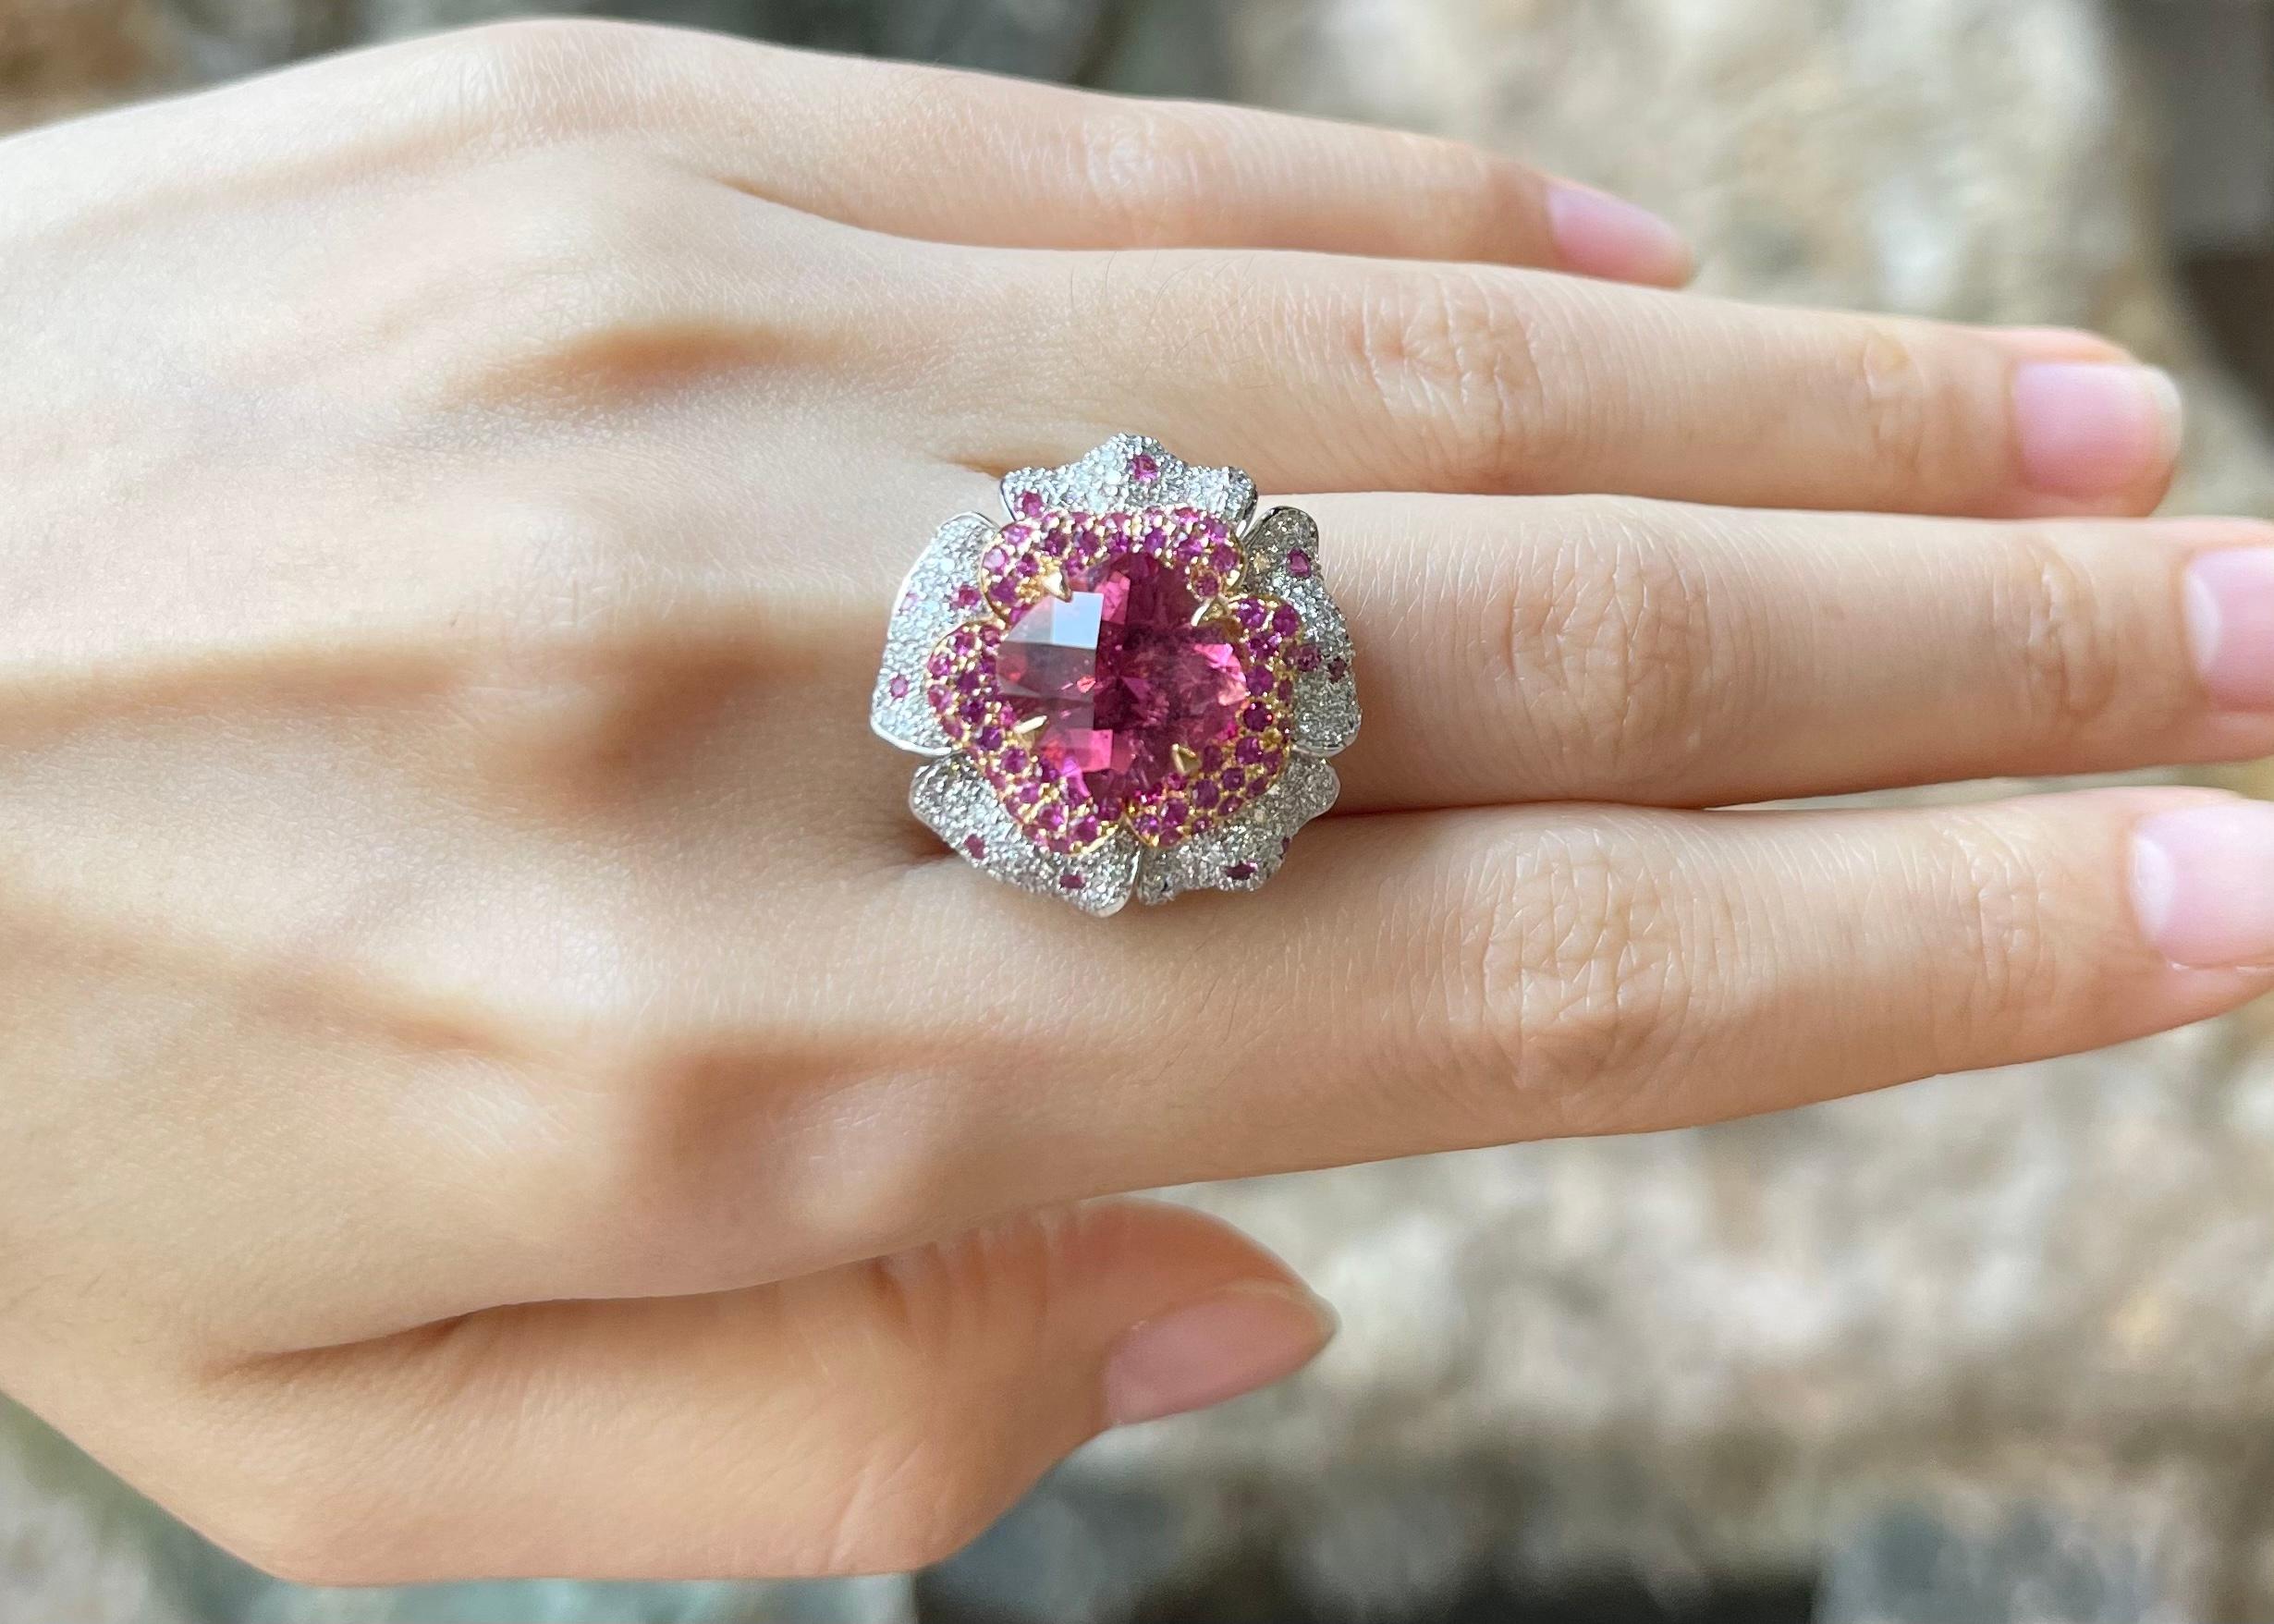 Pink Tourmaline 4.60 carats, Pink Sapphire 1.38 carats and Diamond 1.20 carats Ring set in 18K White Gold Settings

Width:  2.3 cm 
Length: 2.5 cm
Ring Size: 53
Total Weight: 16.412.95 grams

